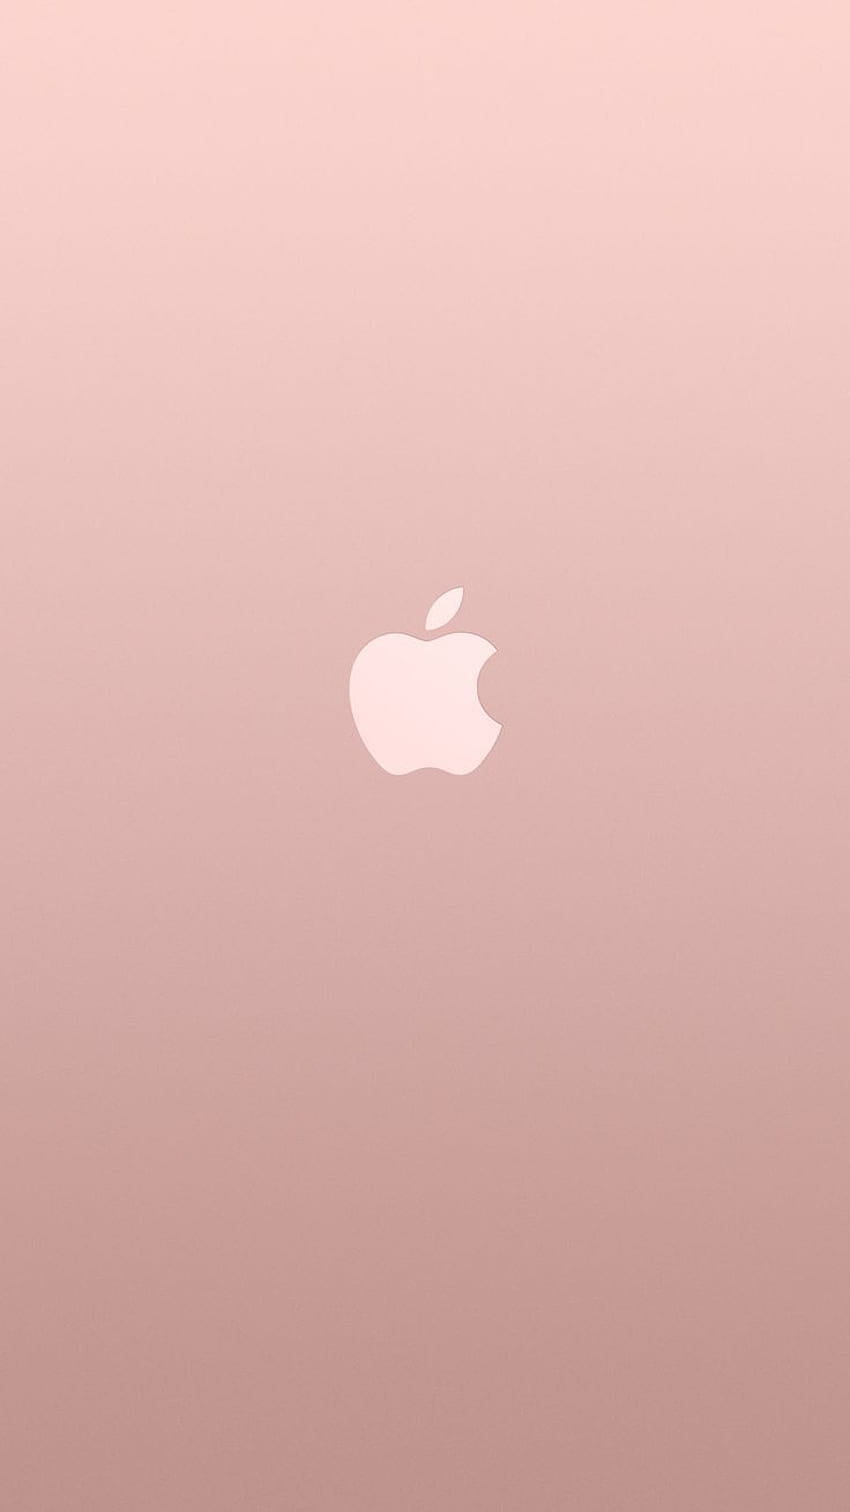 New iPhone 6 & 6S & Background in Quality. Gold iphone, Pink iphone, iPhone 6s, Rose Gold 6 HD phone wallpaper